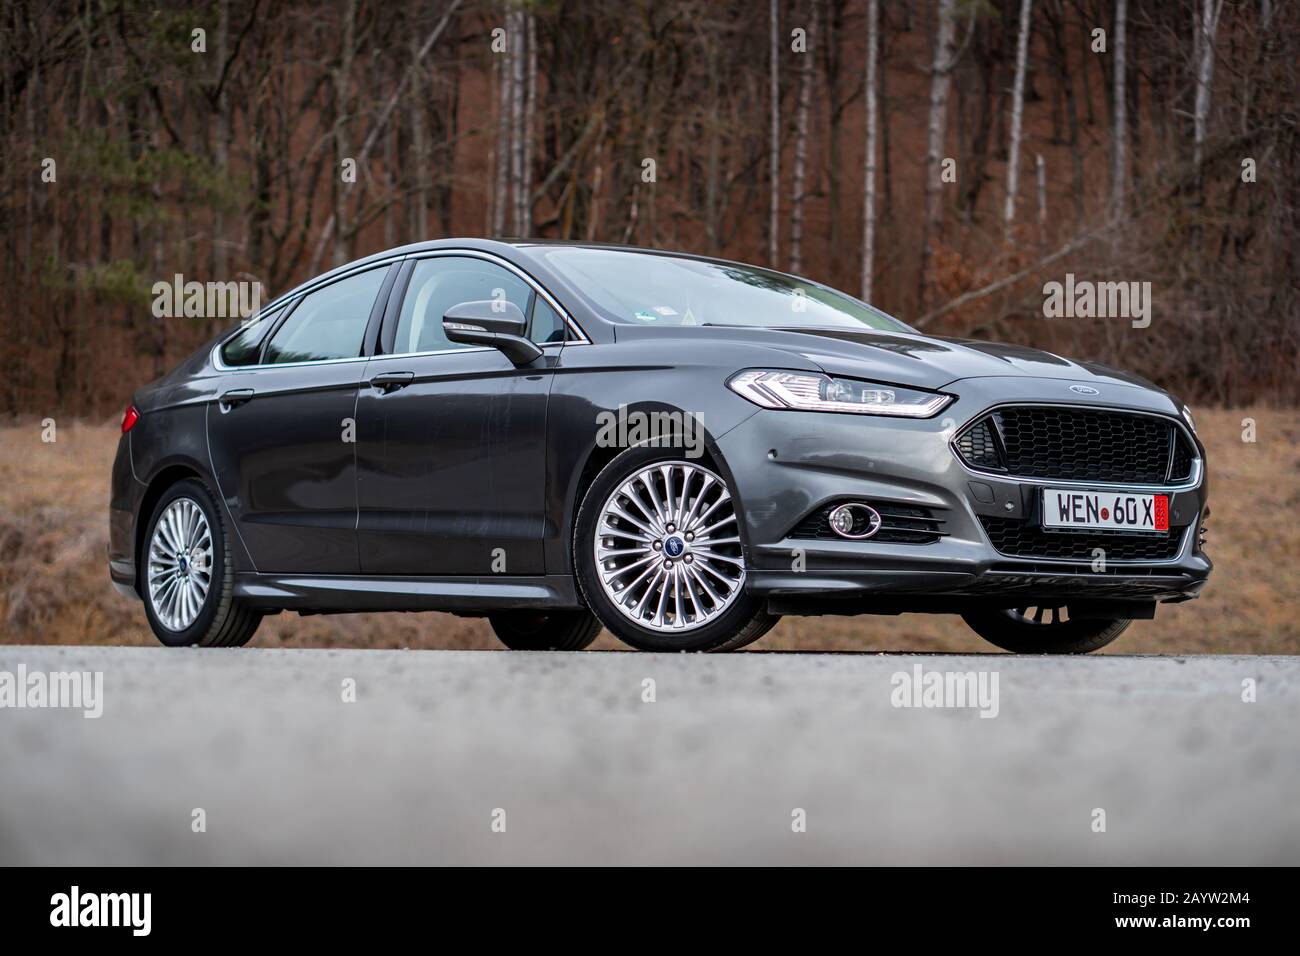 Cluj-Napoca,Cluj/Romania-01.31.2020-Ford Mondeo MK5 Sport edition with  dynamic led headlights, sport front bumper, 18 inch alloy wheels, Aston  Martin look a like, png Stock-Foto